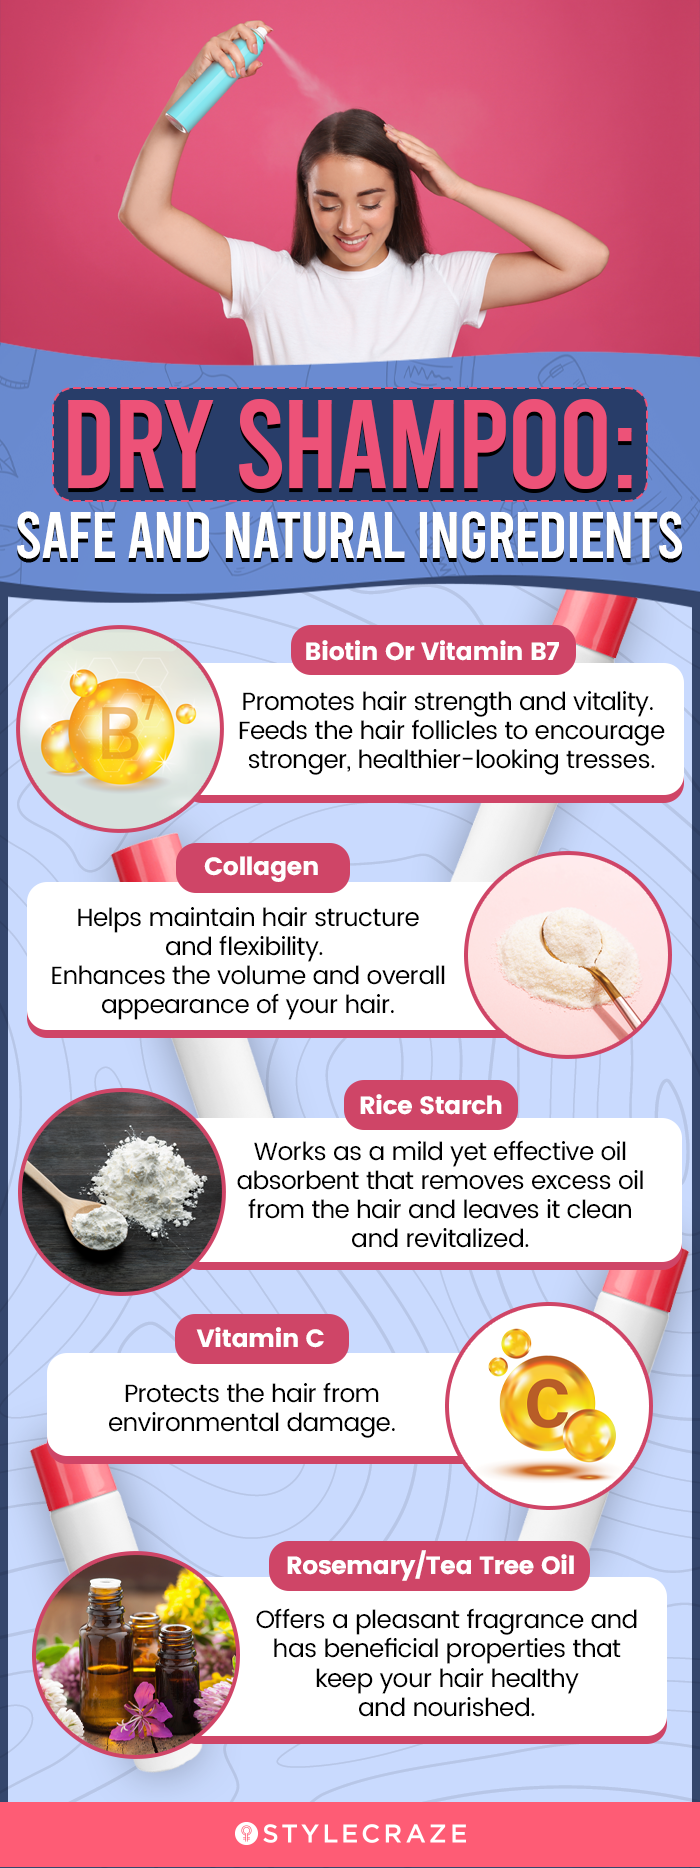 Dry Shampoo: Safe And Natural Ingredients (infographic)